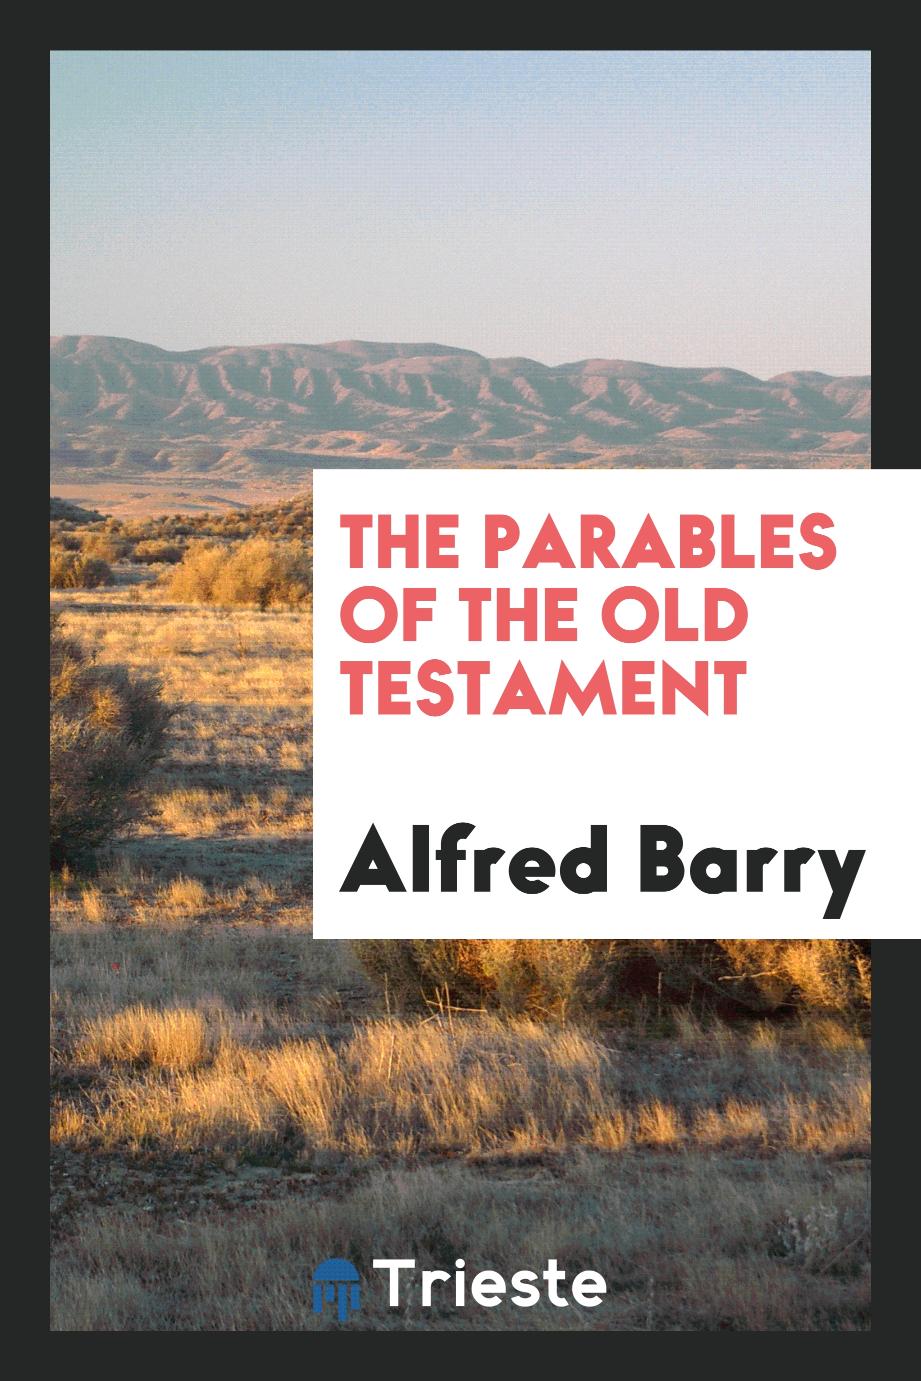 The parables of the Old Testament